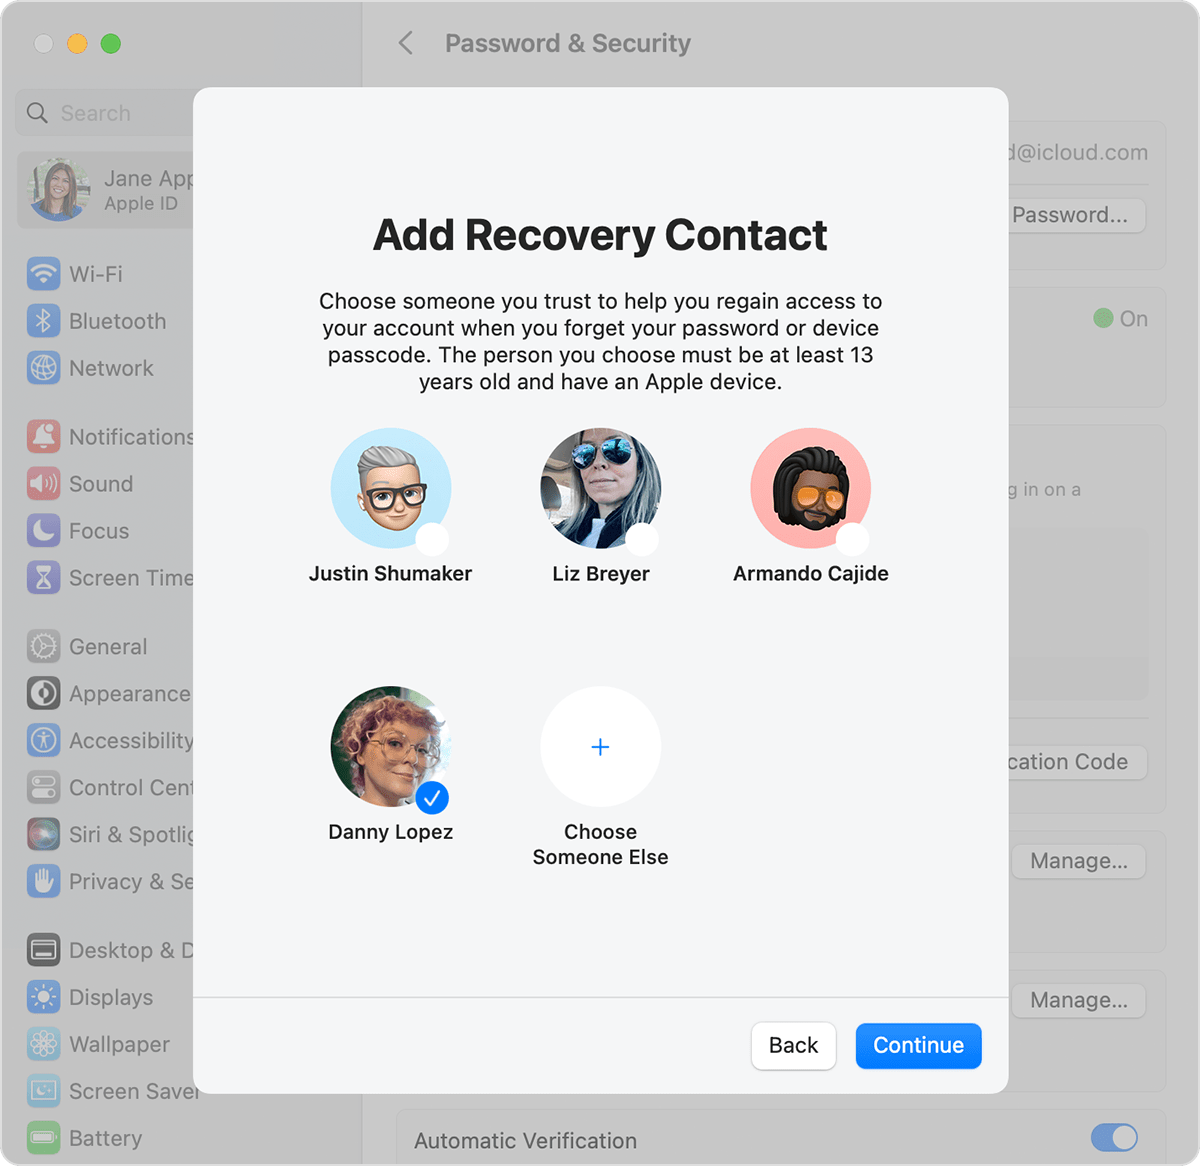 macos ventura system settings apple id password security account recovery add recovery contact